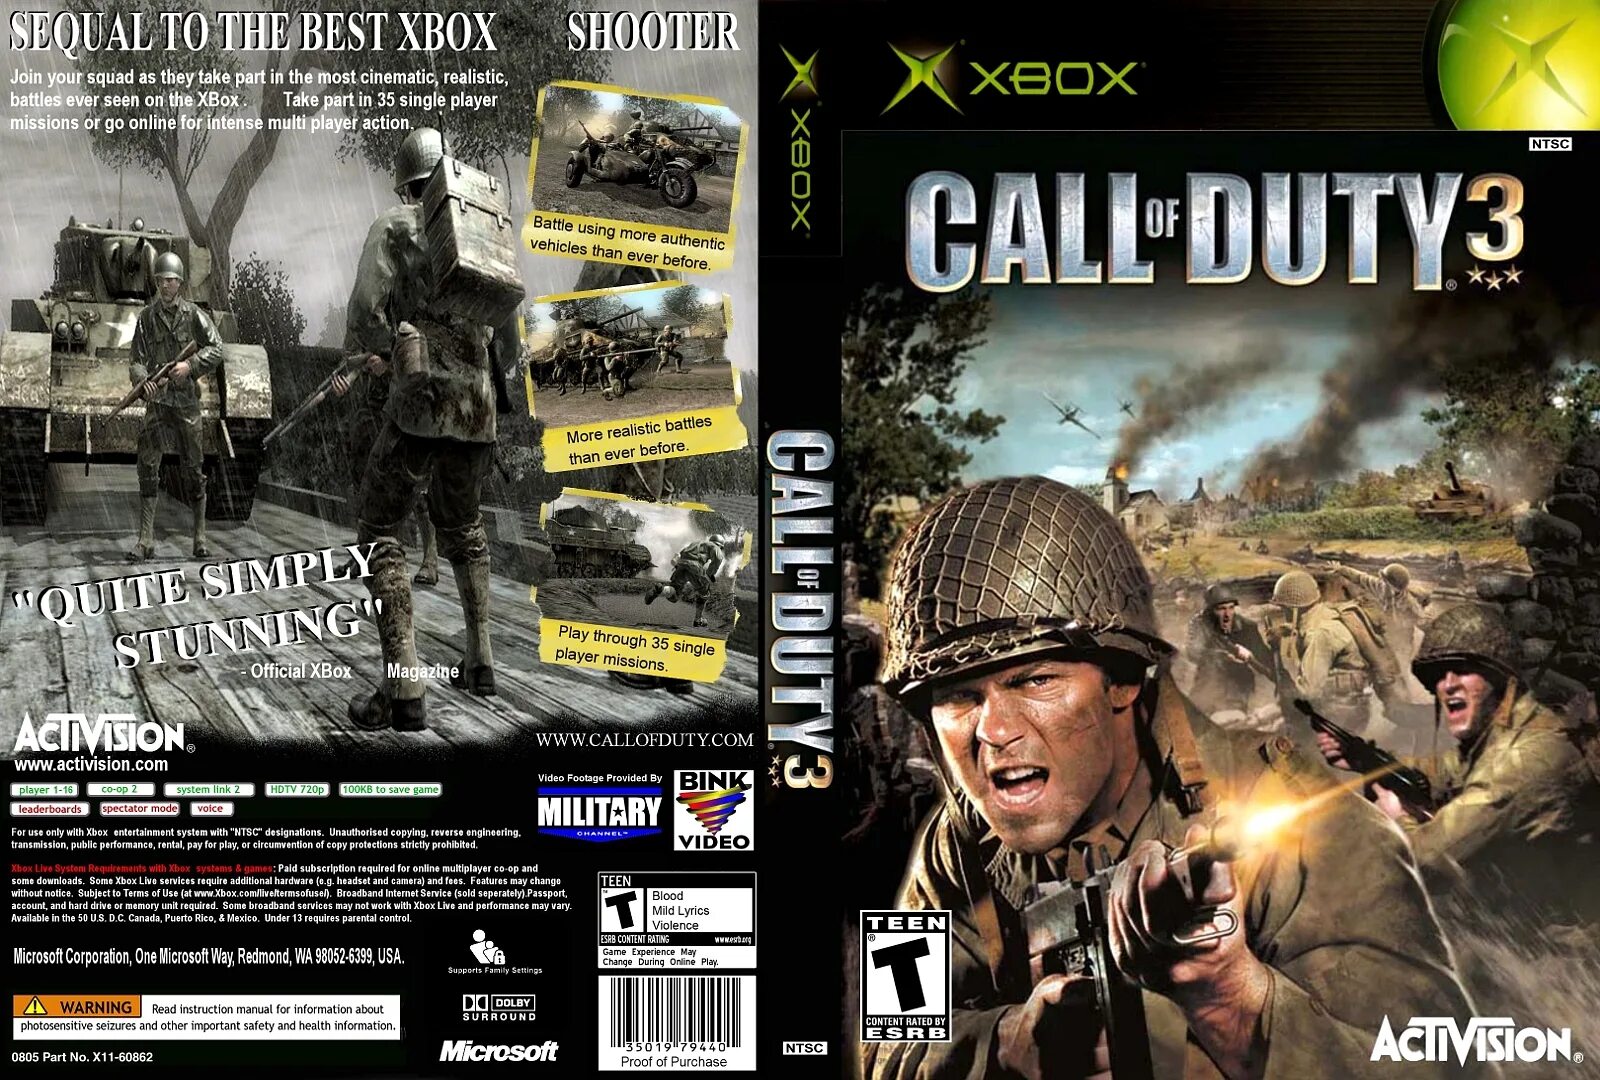 Диск игры call of duty. Call of Duty 3 Xbox 360 диск. Call of Duty 3 Xbox 360 обложка. Call of Duty 3 ps2 обложка. Call of Duty 2 PS 2 диск.